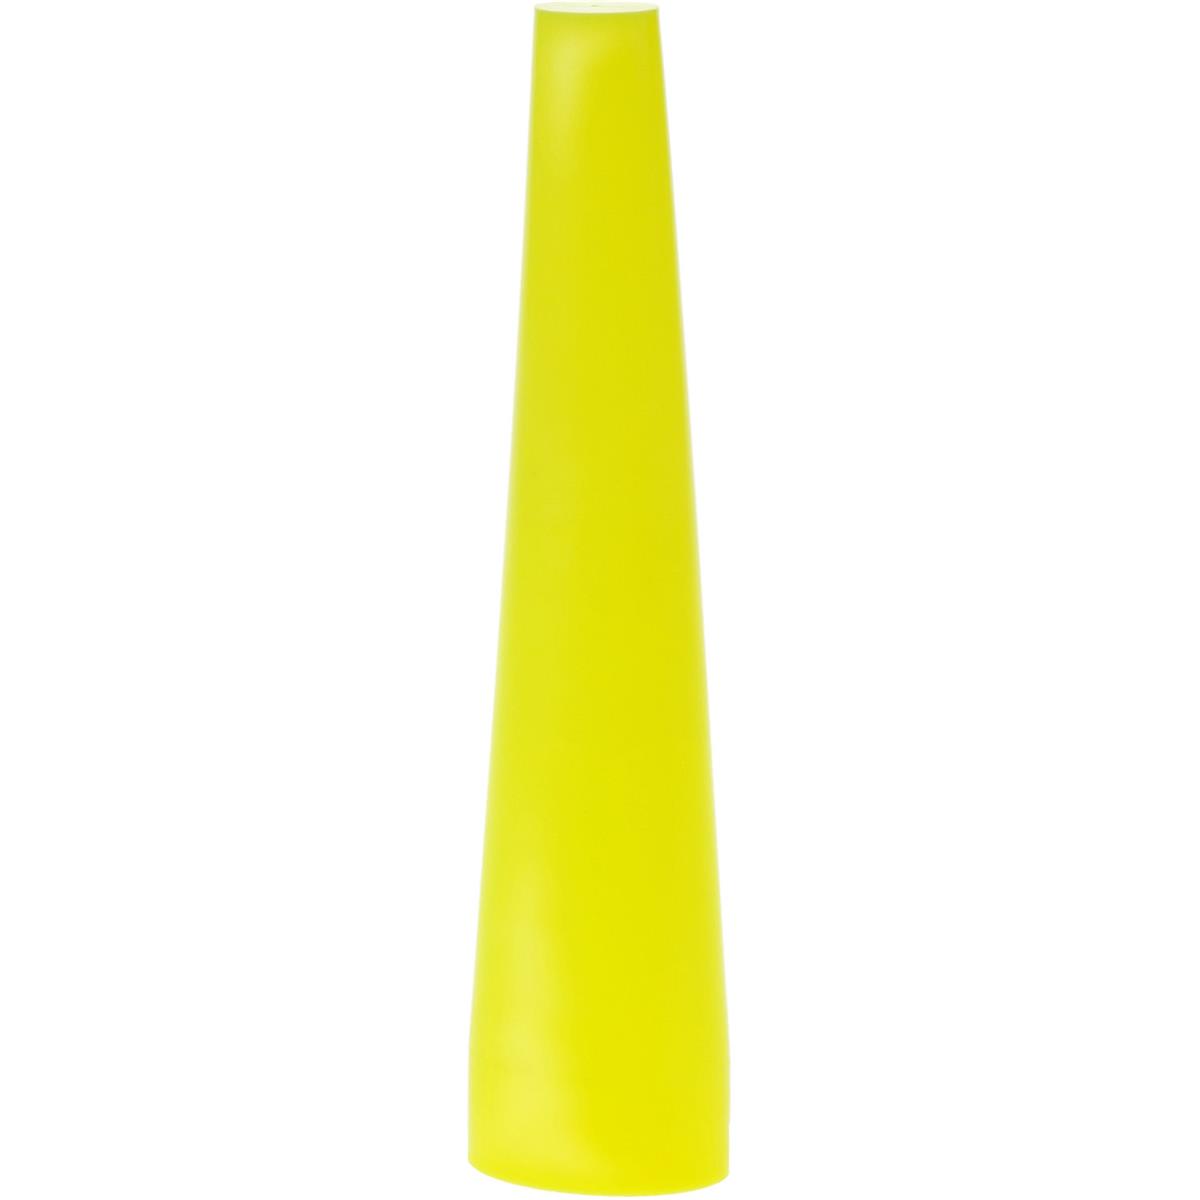 Nightstick Yellow Safety Cone for 9514 / 9614 / 9744 / 9920 / 9924 / 9944 Series LED Lights